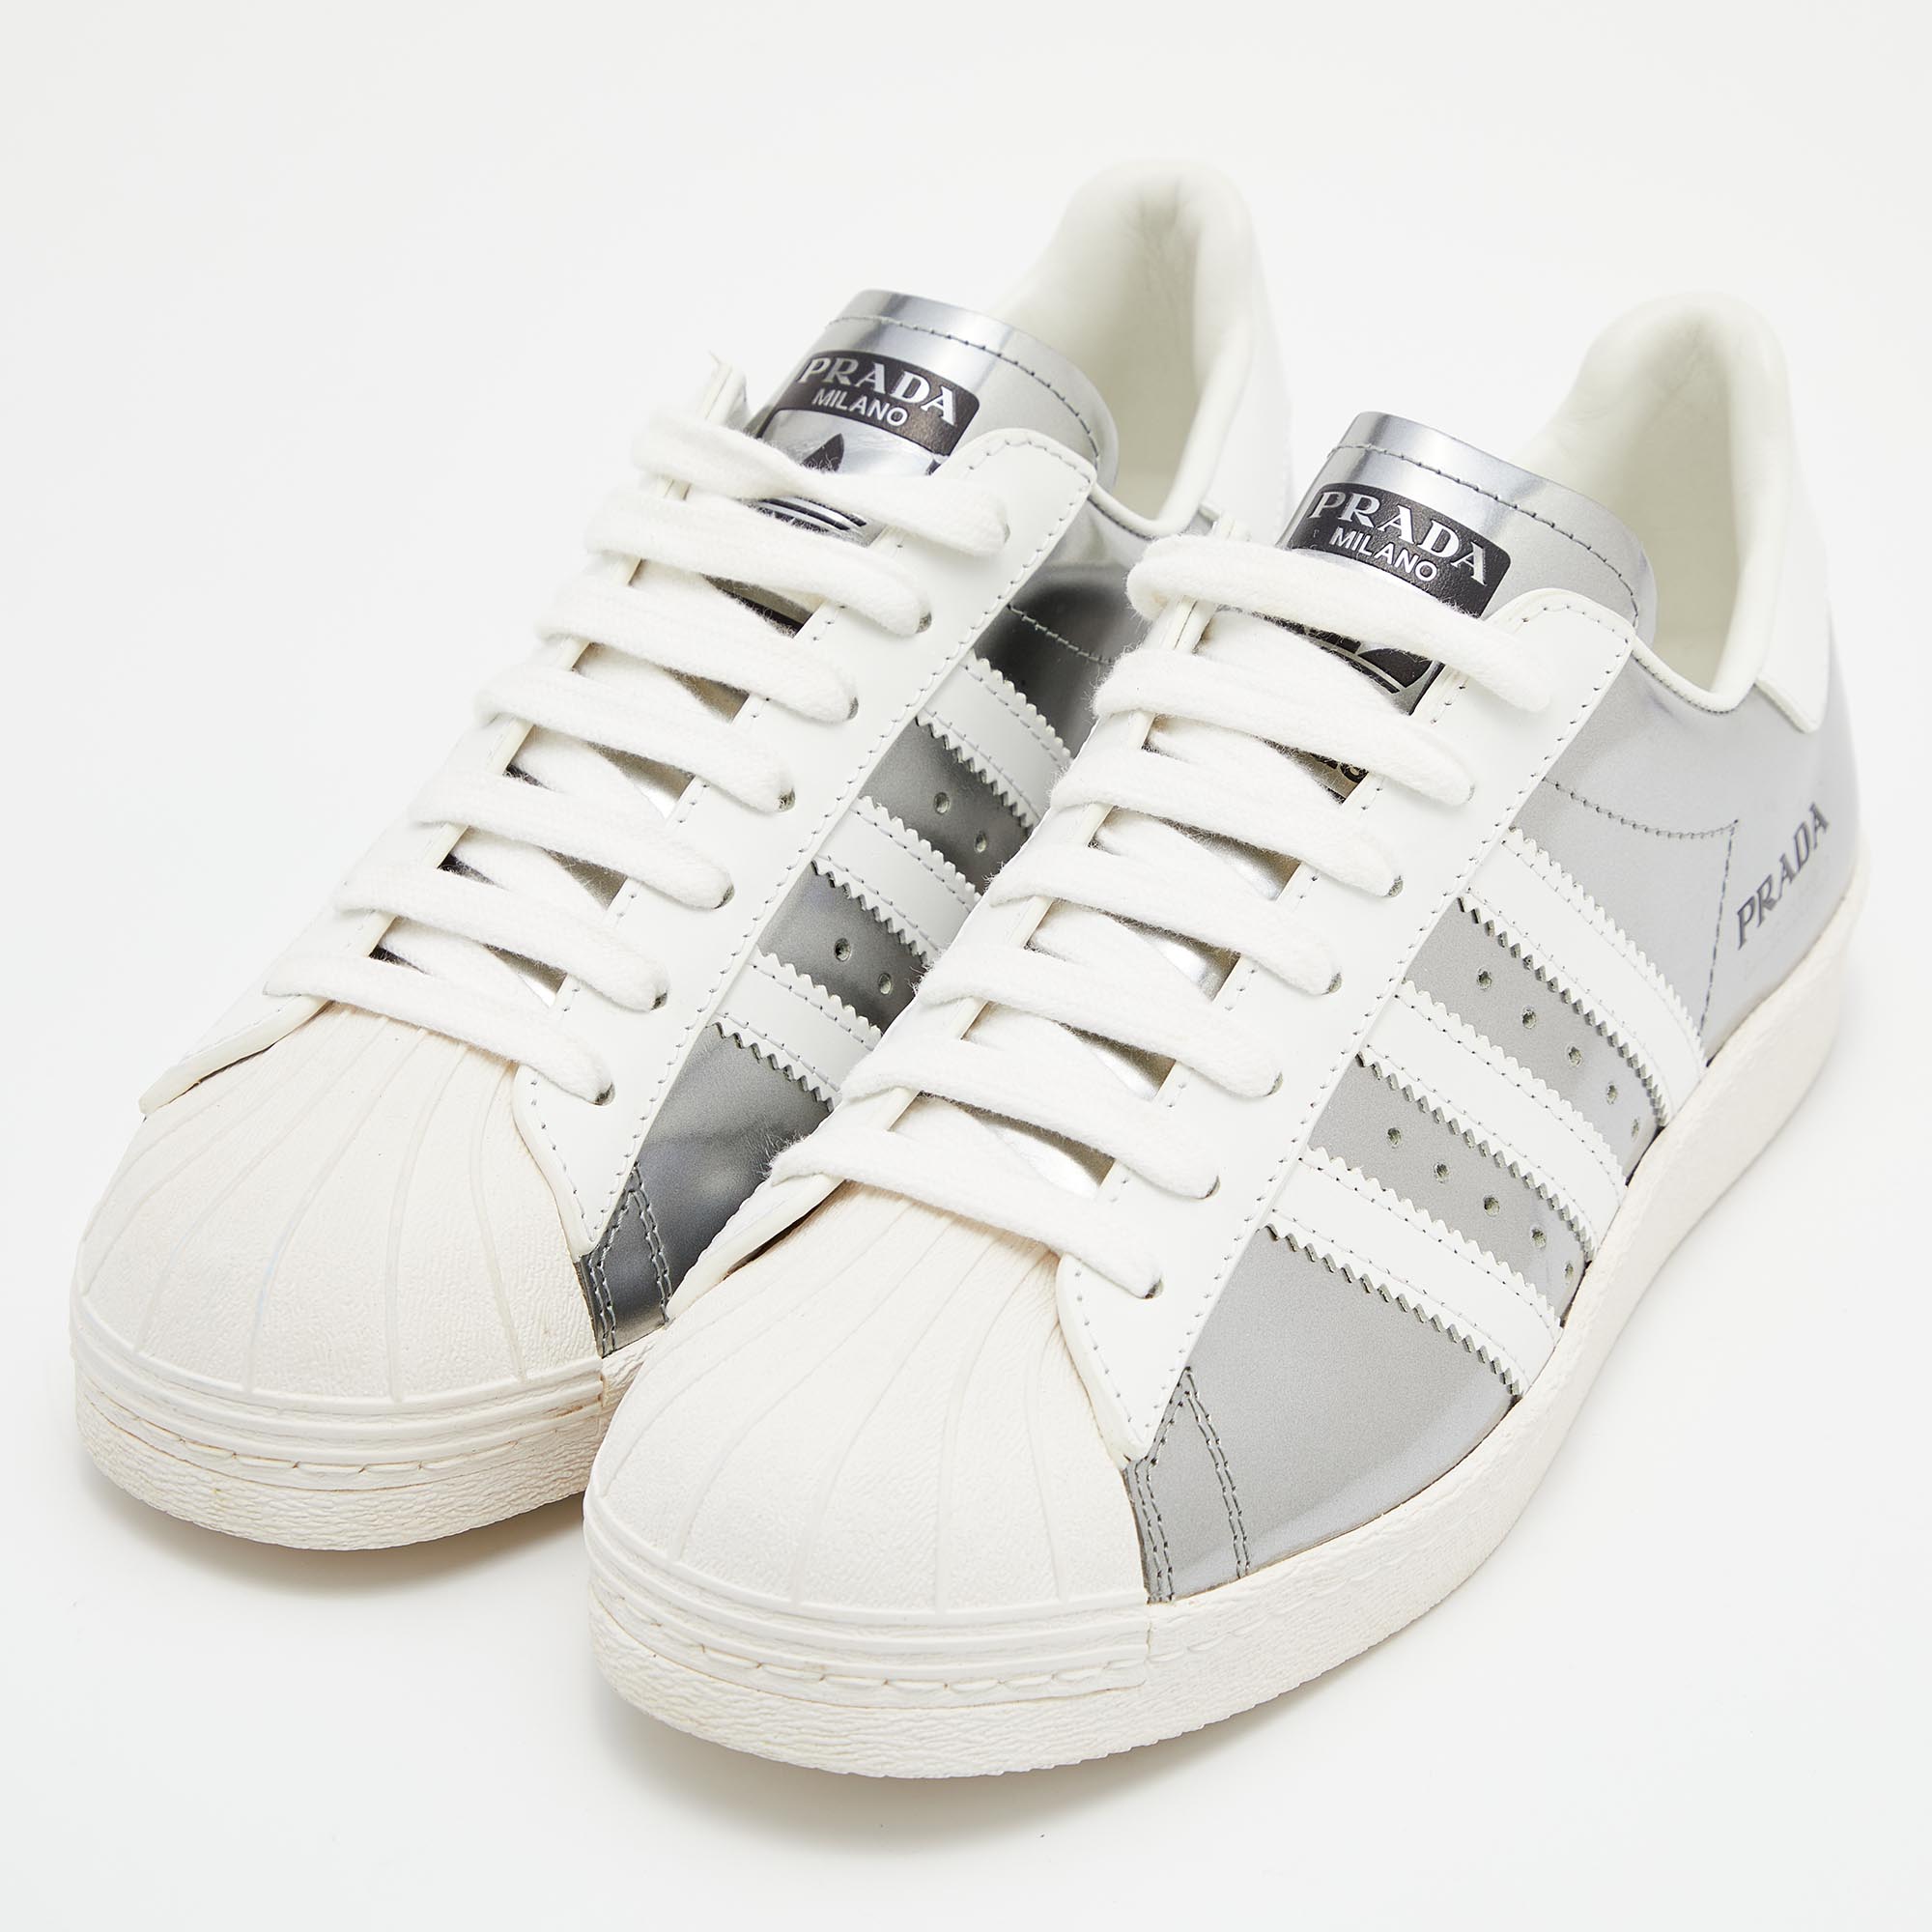 

Prada x Adidas White/Silver Leather Superstar Low Top Sneakers Size  1/3